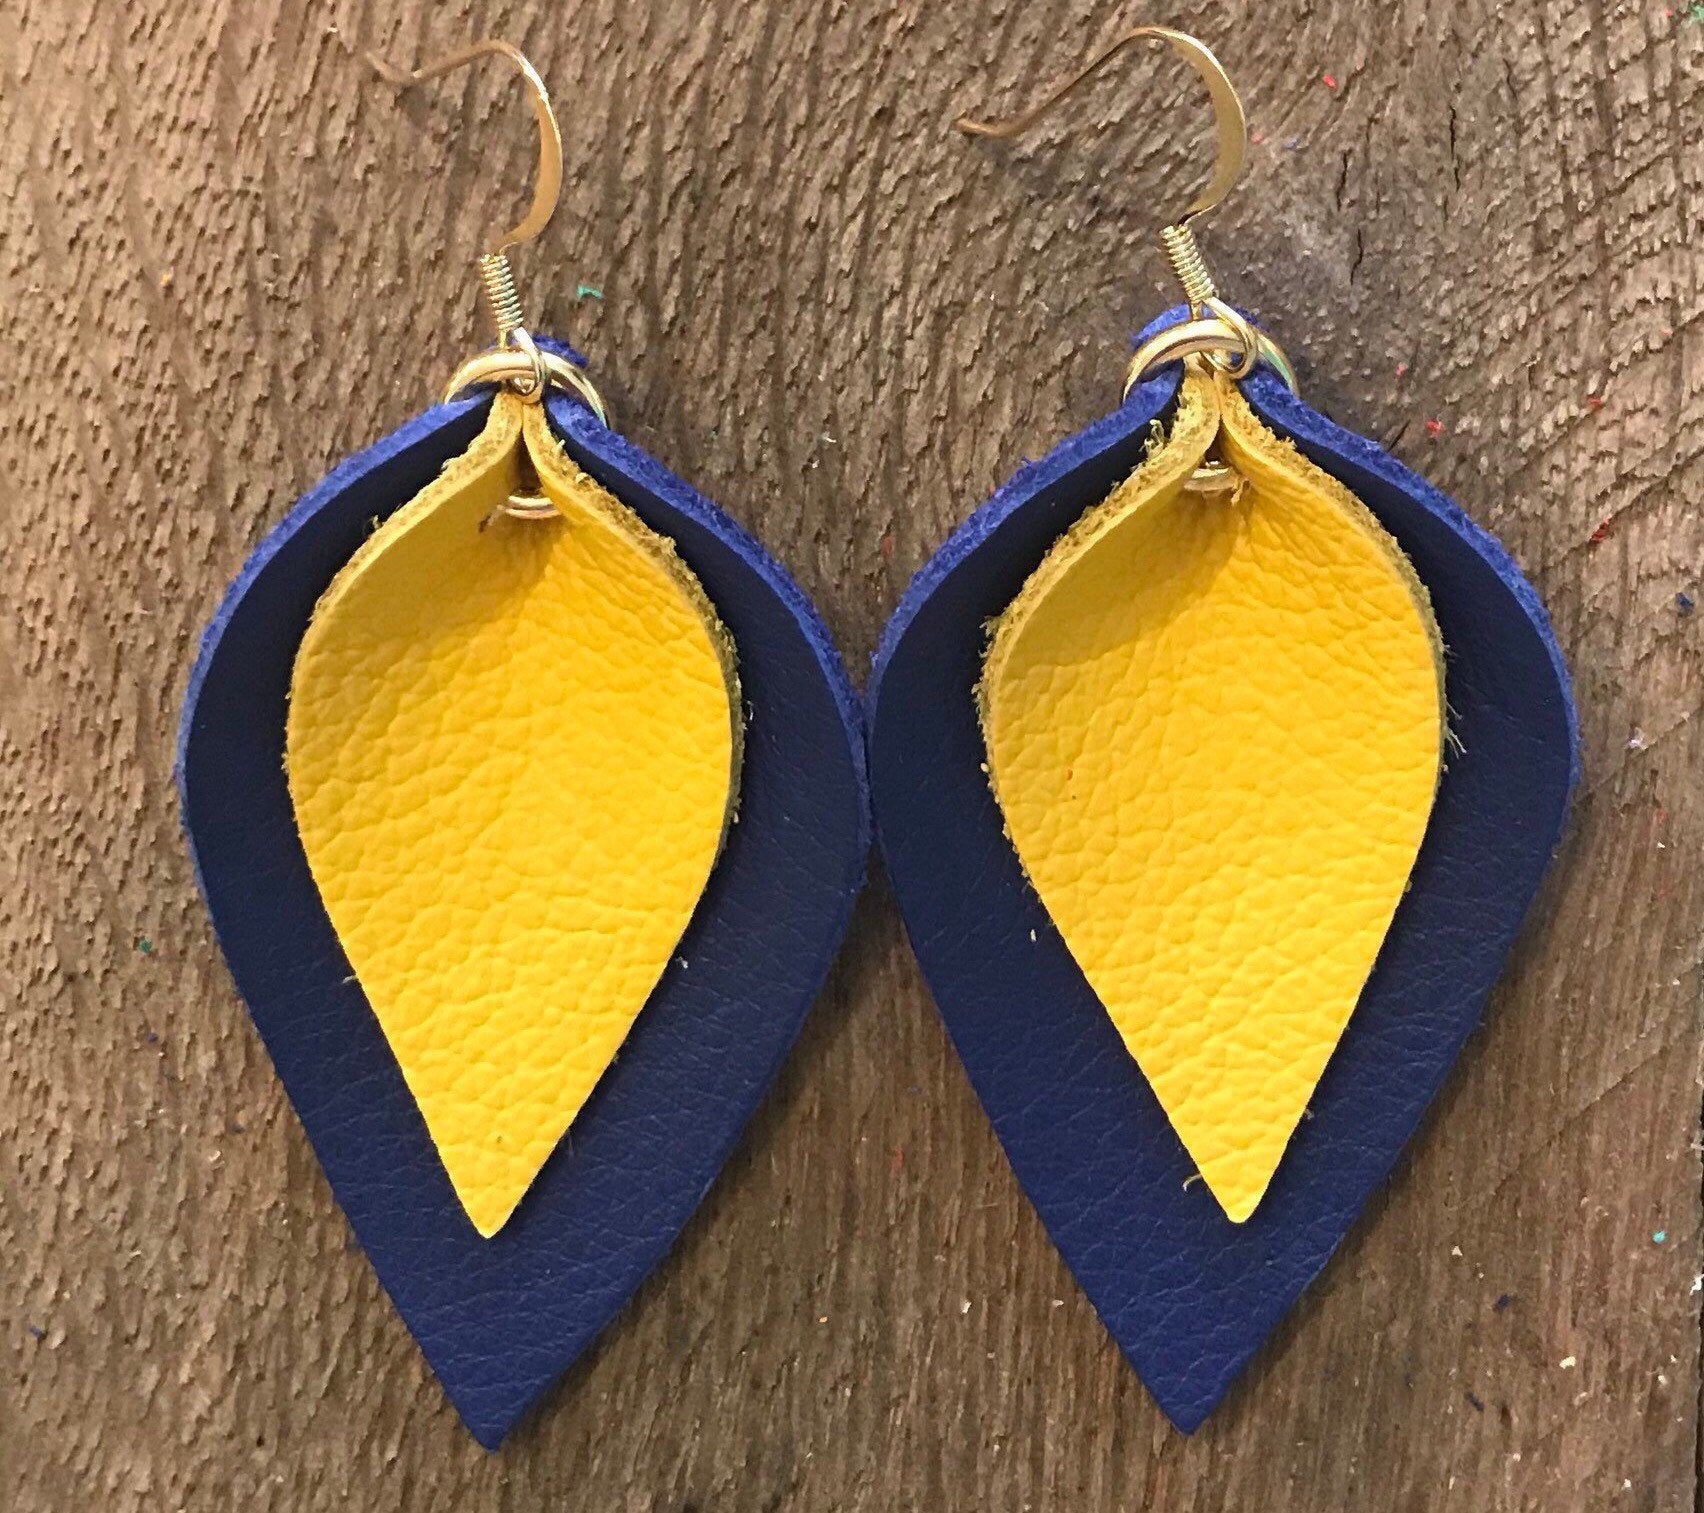 katie-double-layered-leather-leaf-shaped-earrings-in-navy-blue-and-maize